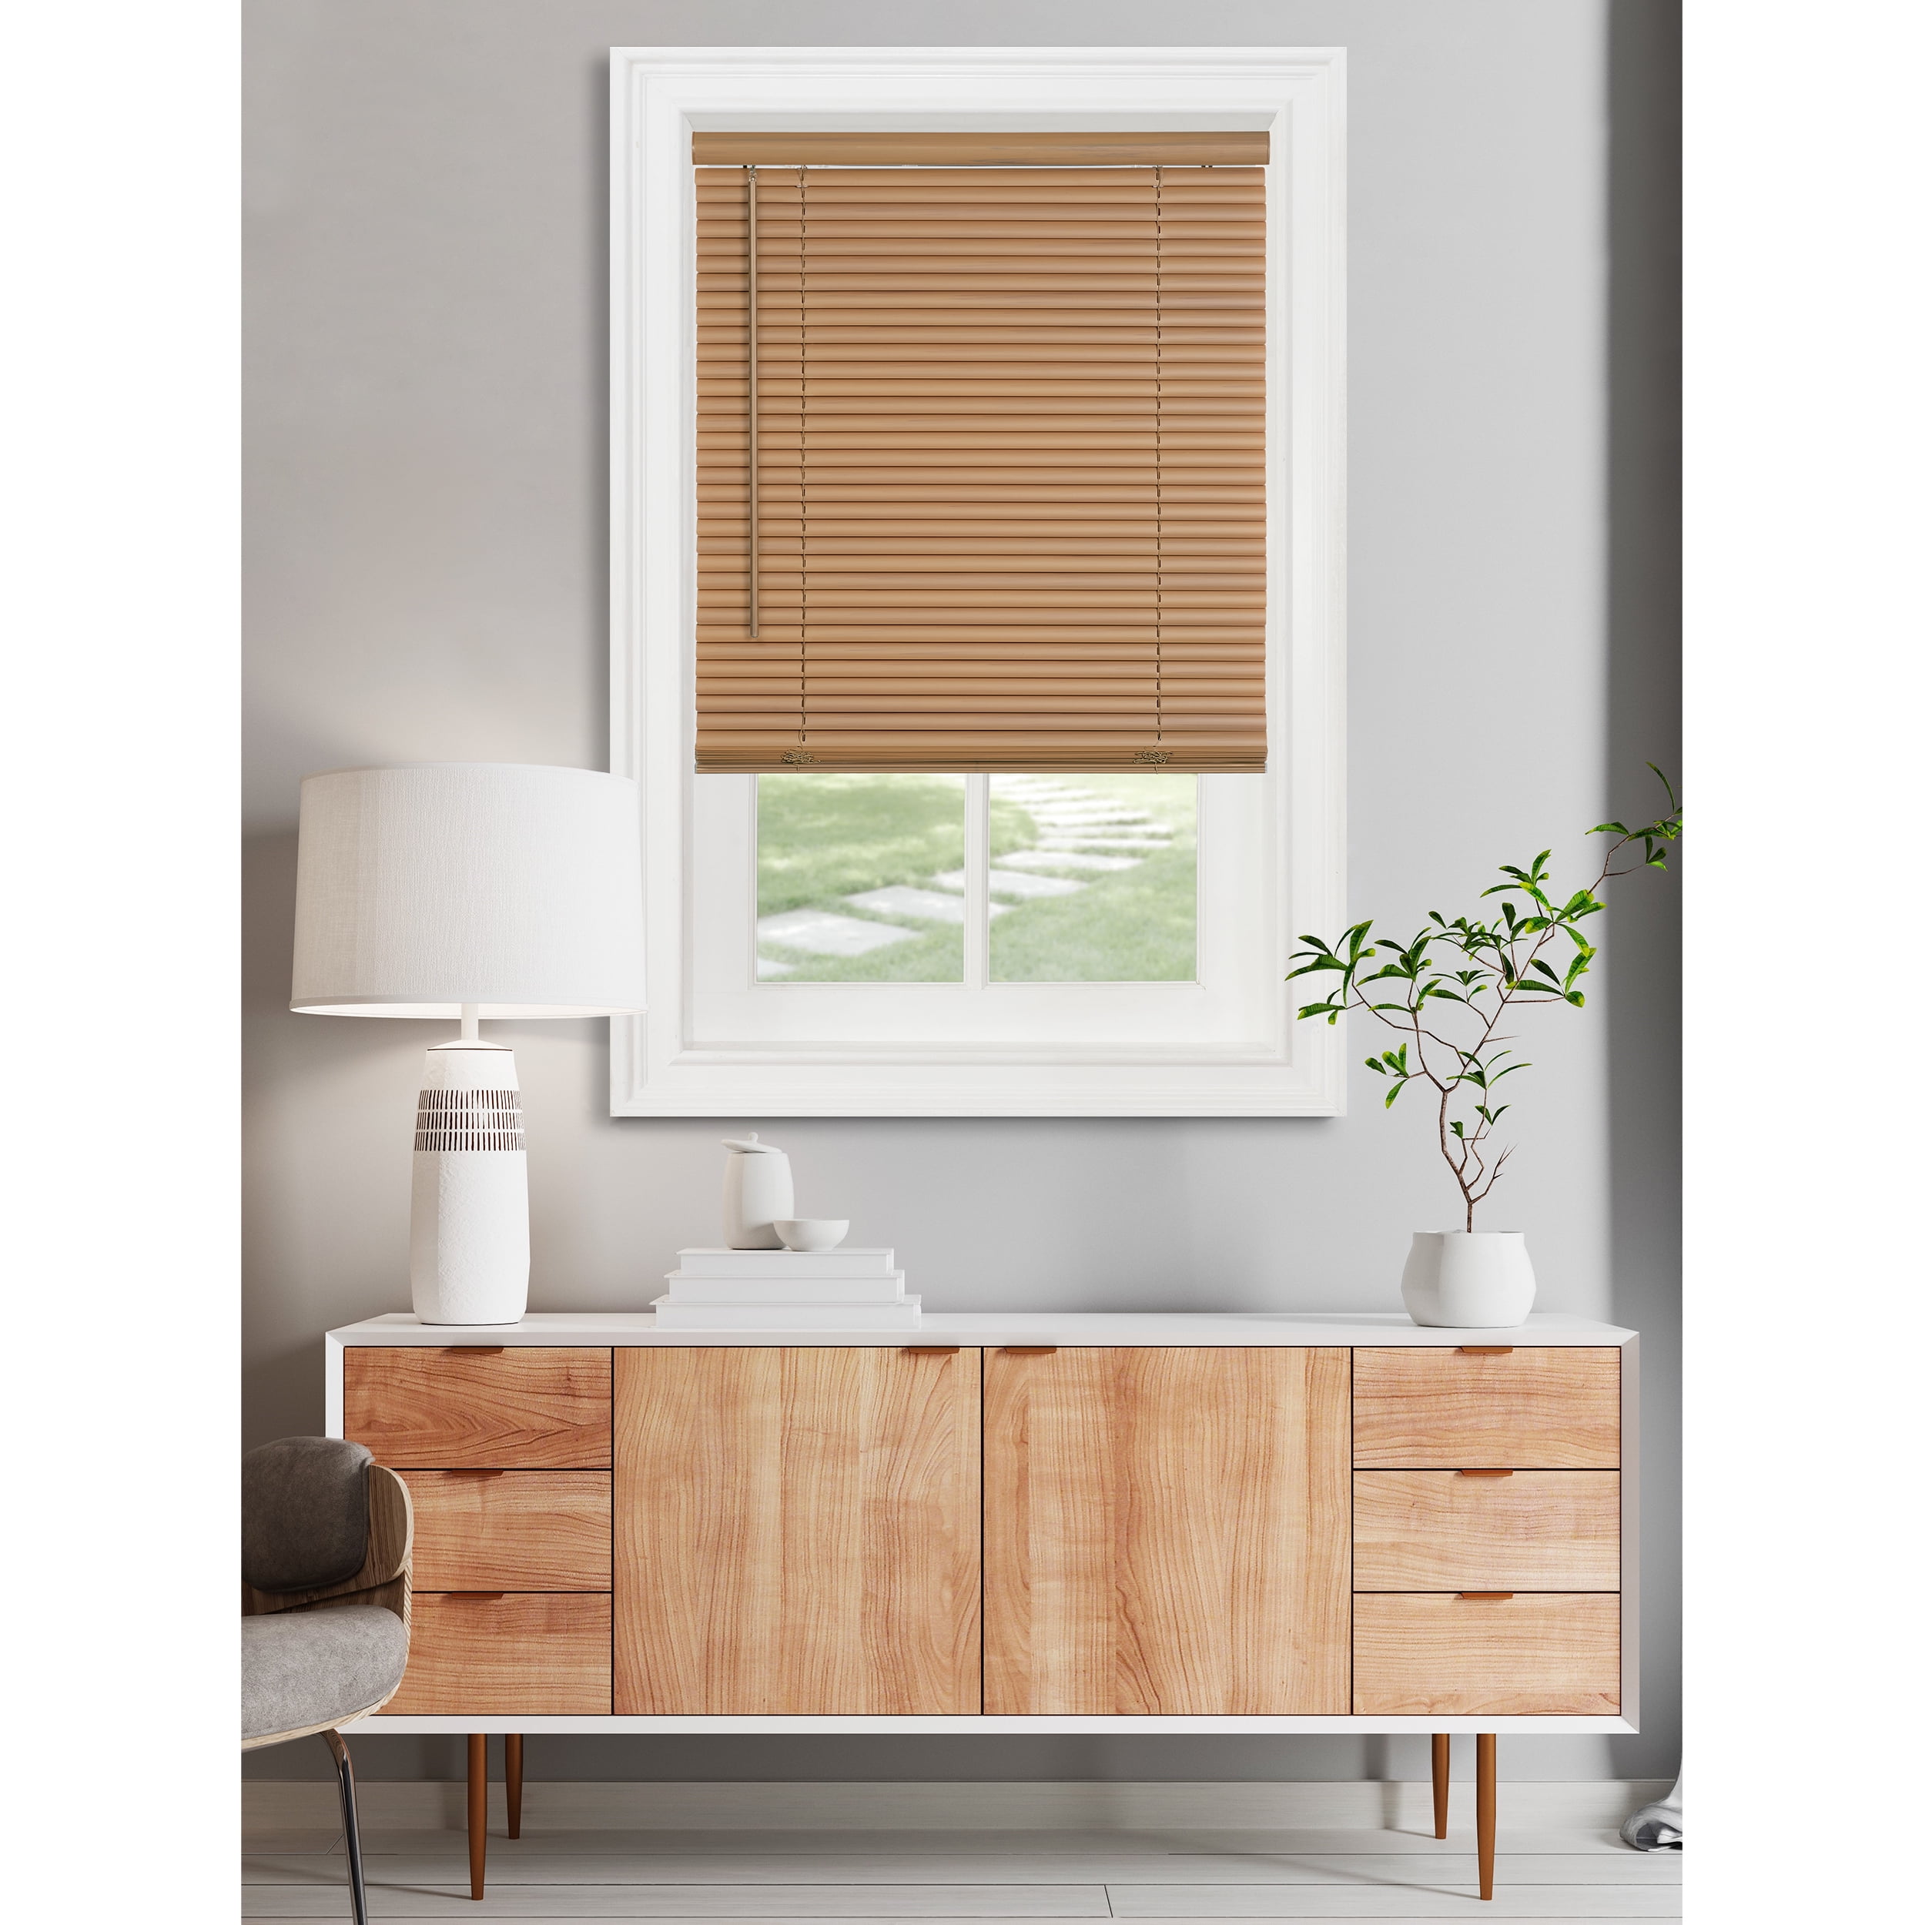 Picture of Achim MSG2337WD6 Cordless GII Morningstar 1 in. Light Filtering Mini - Blind 33 x 72 in. - Woodtone